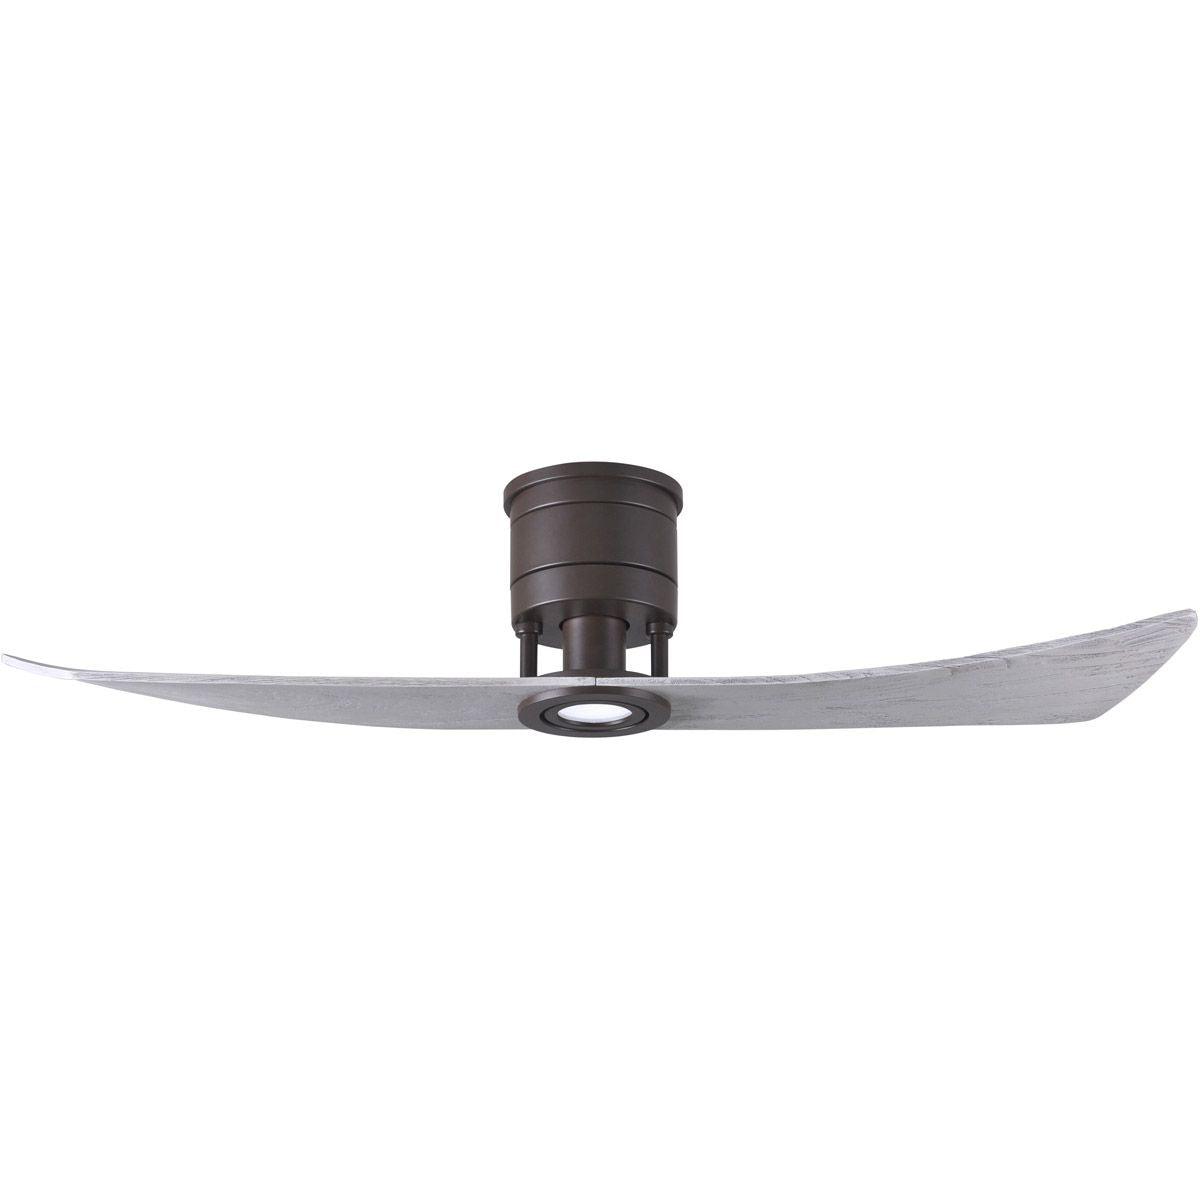 Lindsay 52 Inch Modern Outdoor Ceiling Fan With Light, Wall And Remote Control Included - Bees Lighting